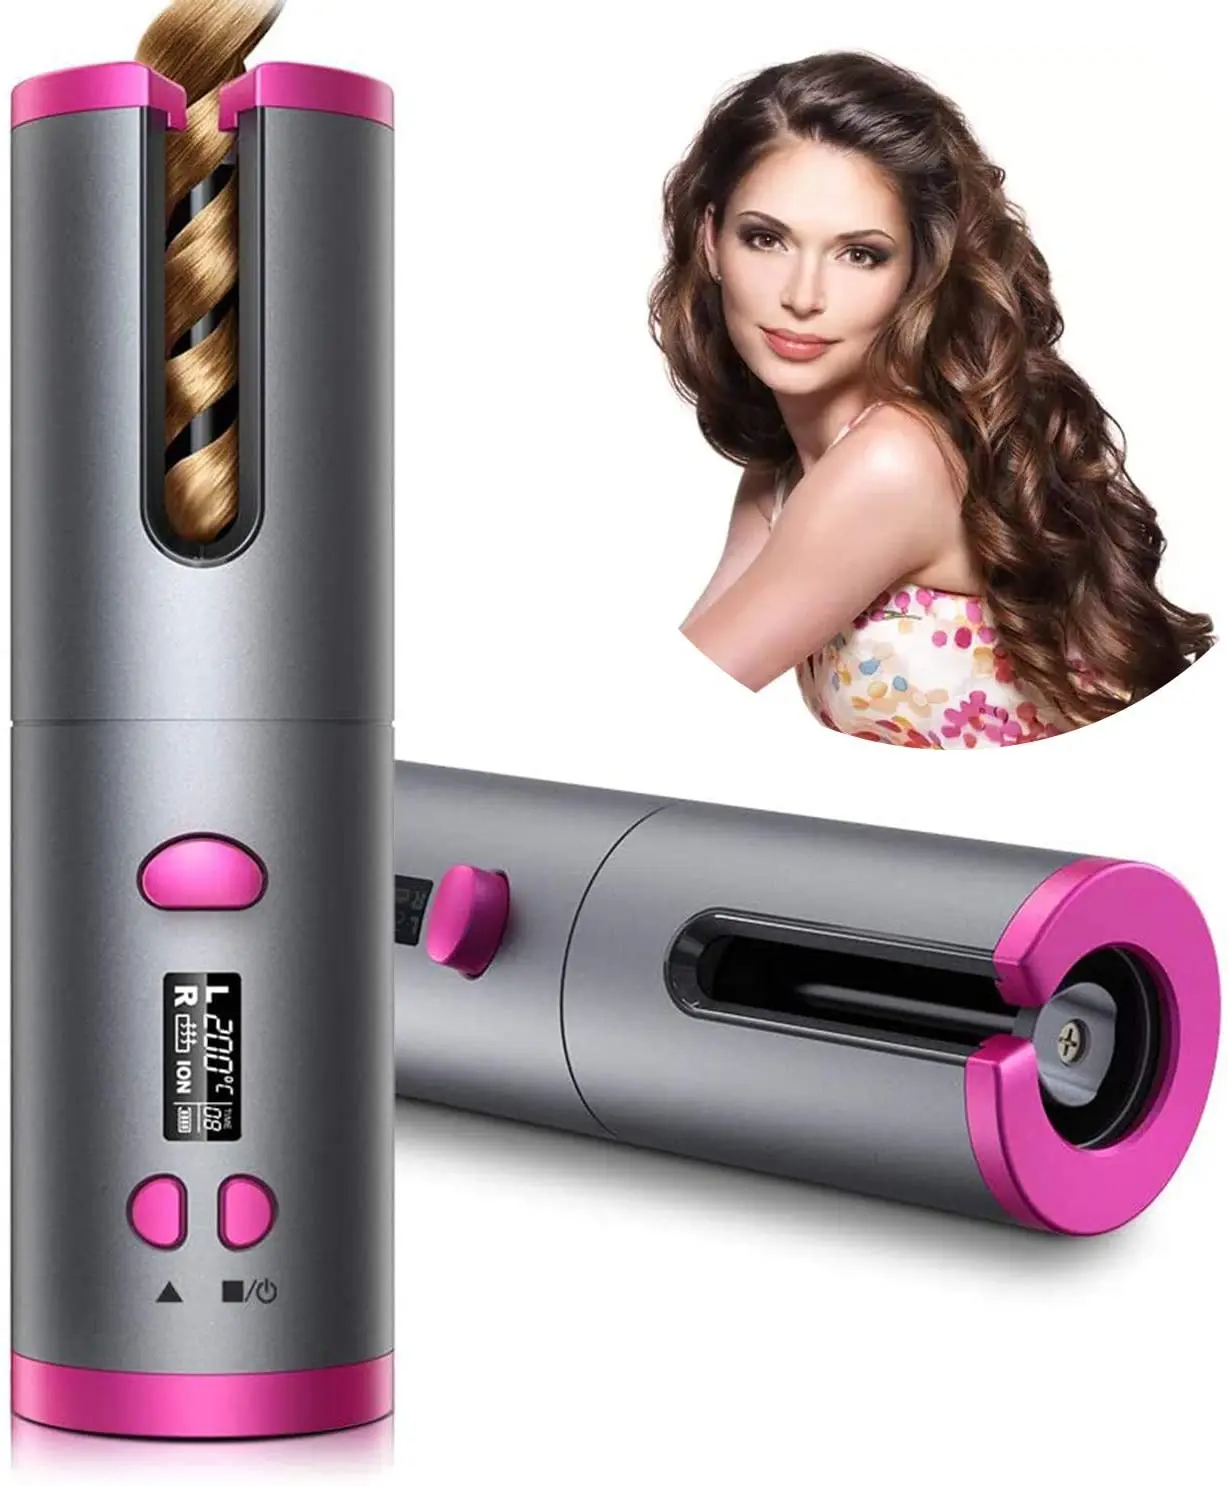 

Amazon Automatic Curling Iron Portable Ceramic Barrel Hair Curling Wand LCD Adjustable Rechargeable Cordless Auto Hair Curler, White/rose gold/black or oem